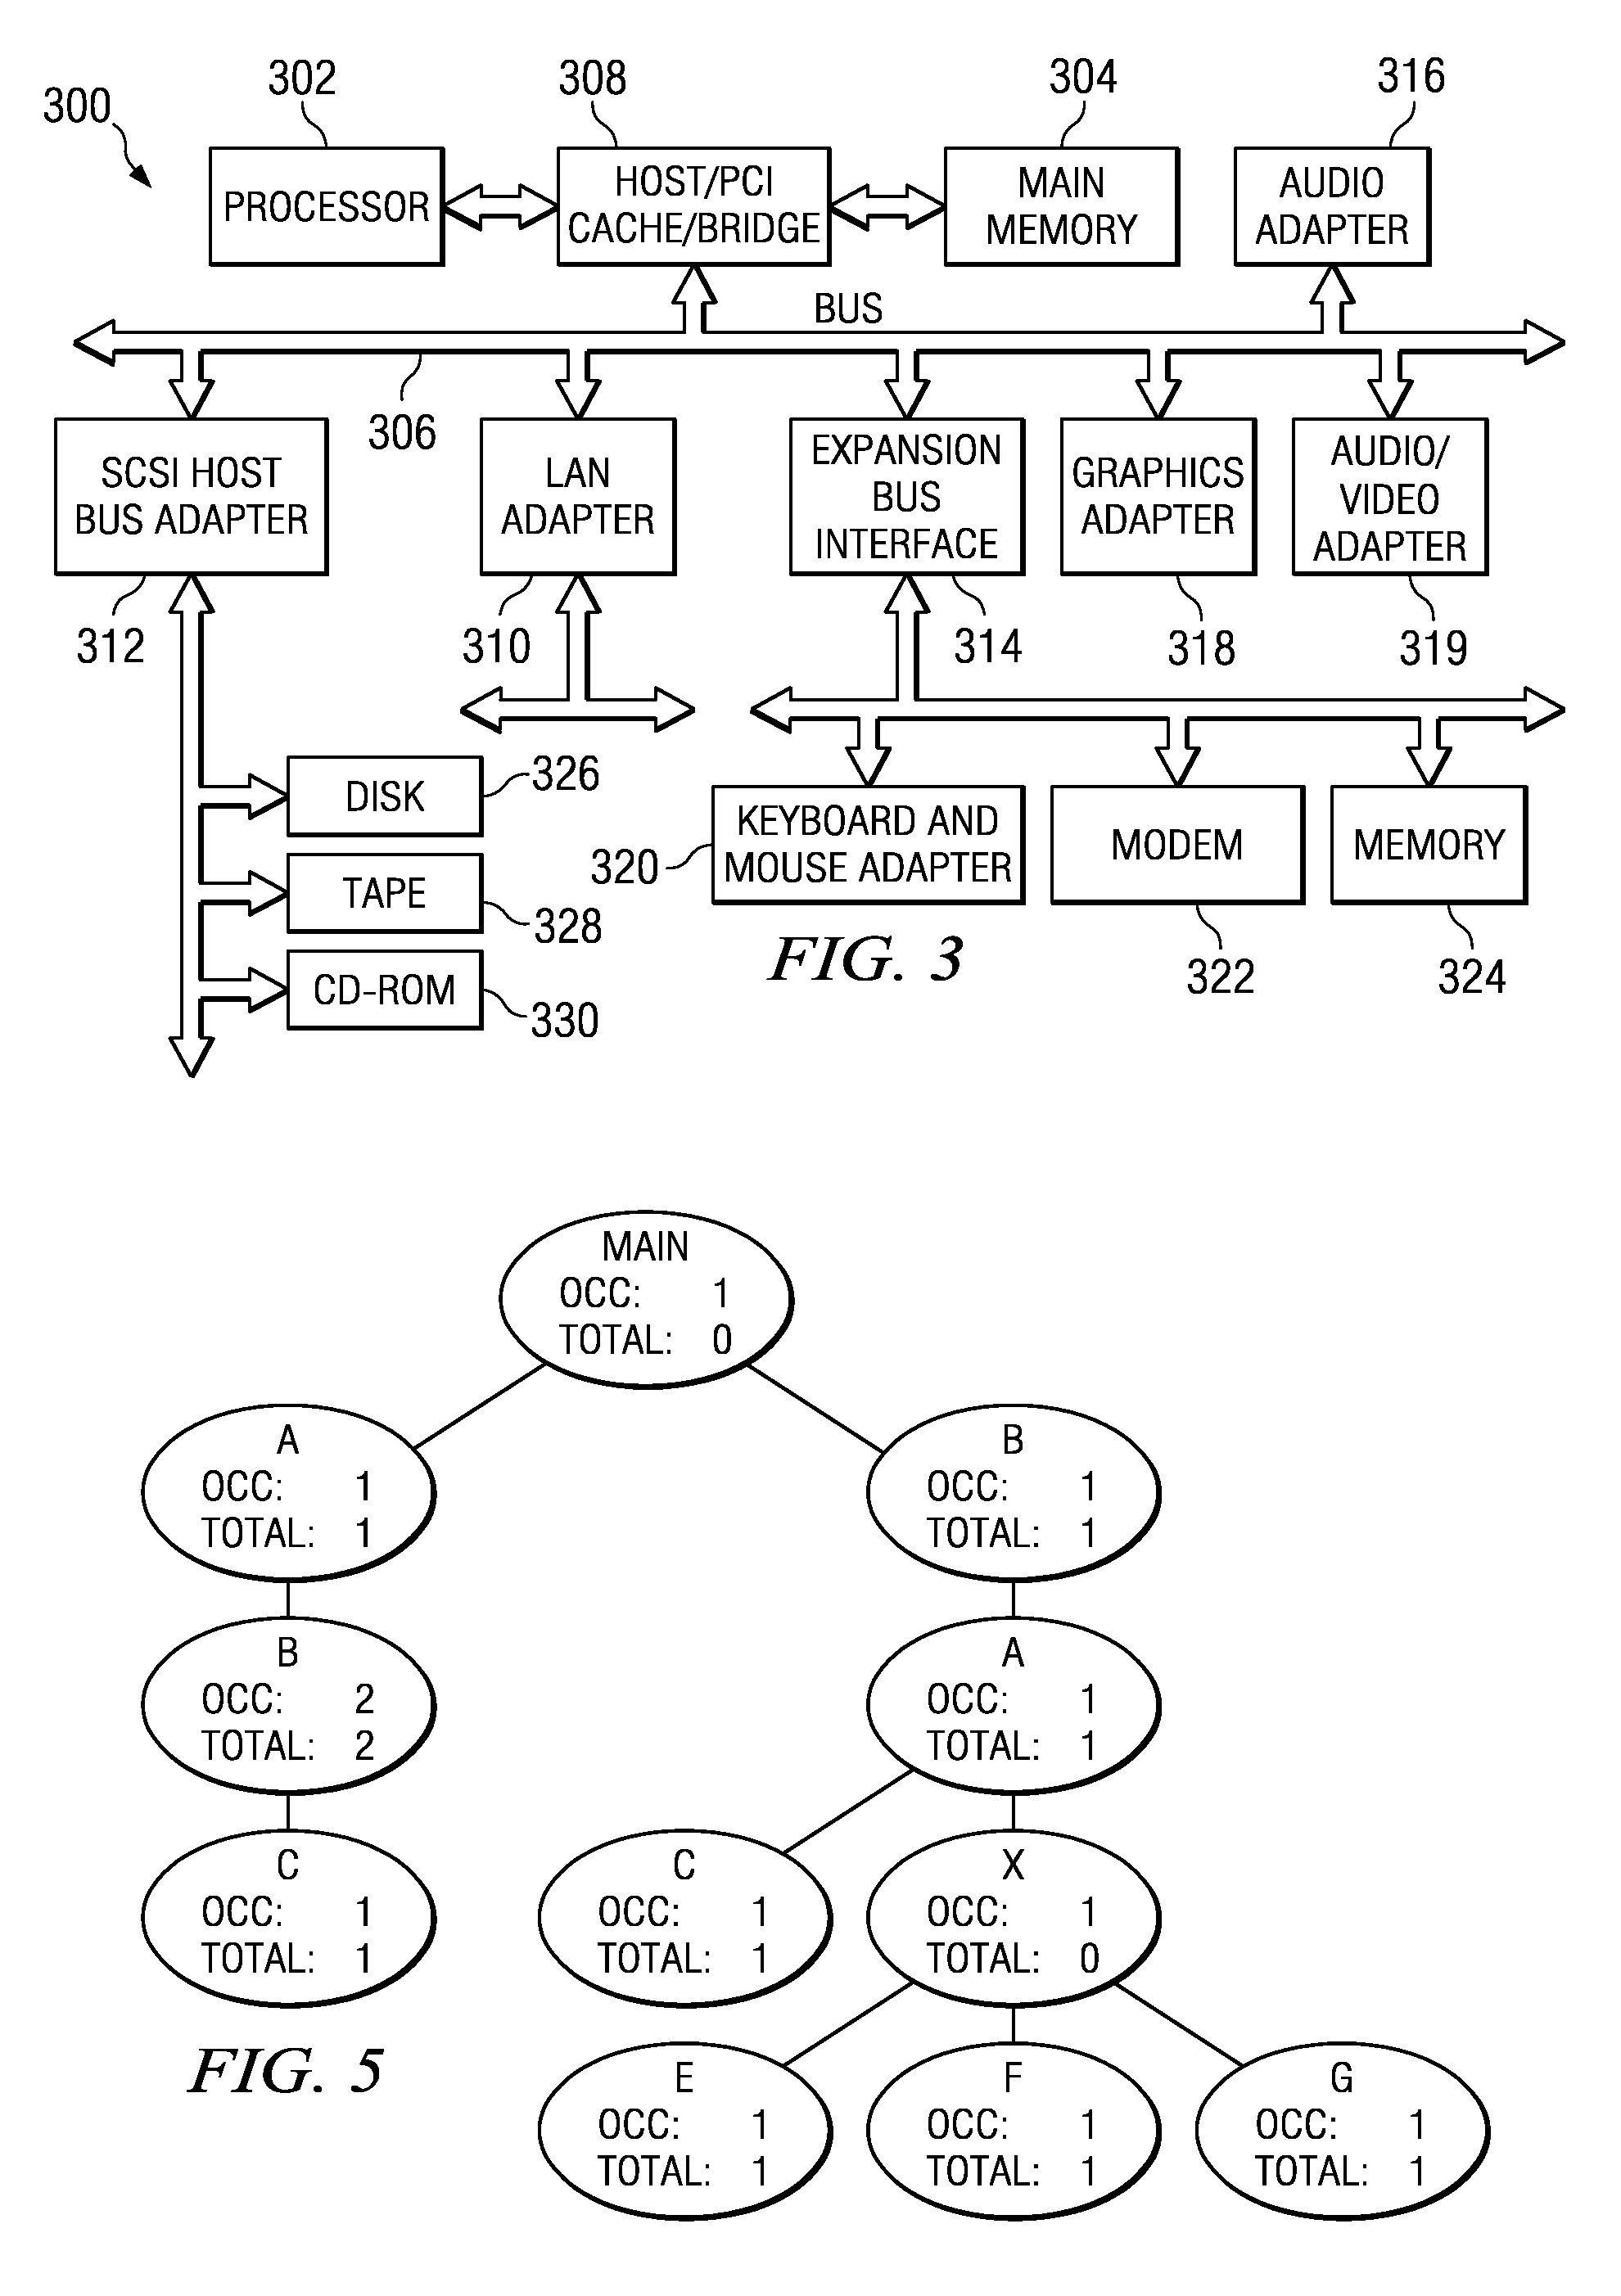 Method for Automatic Detection of Build Regressions